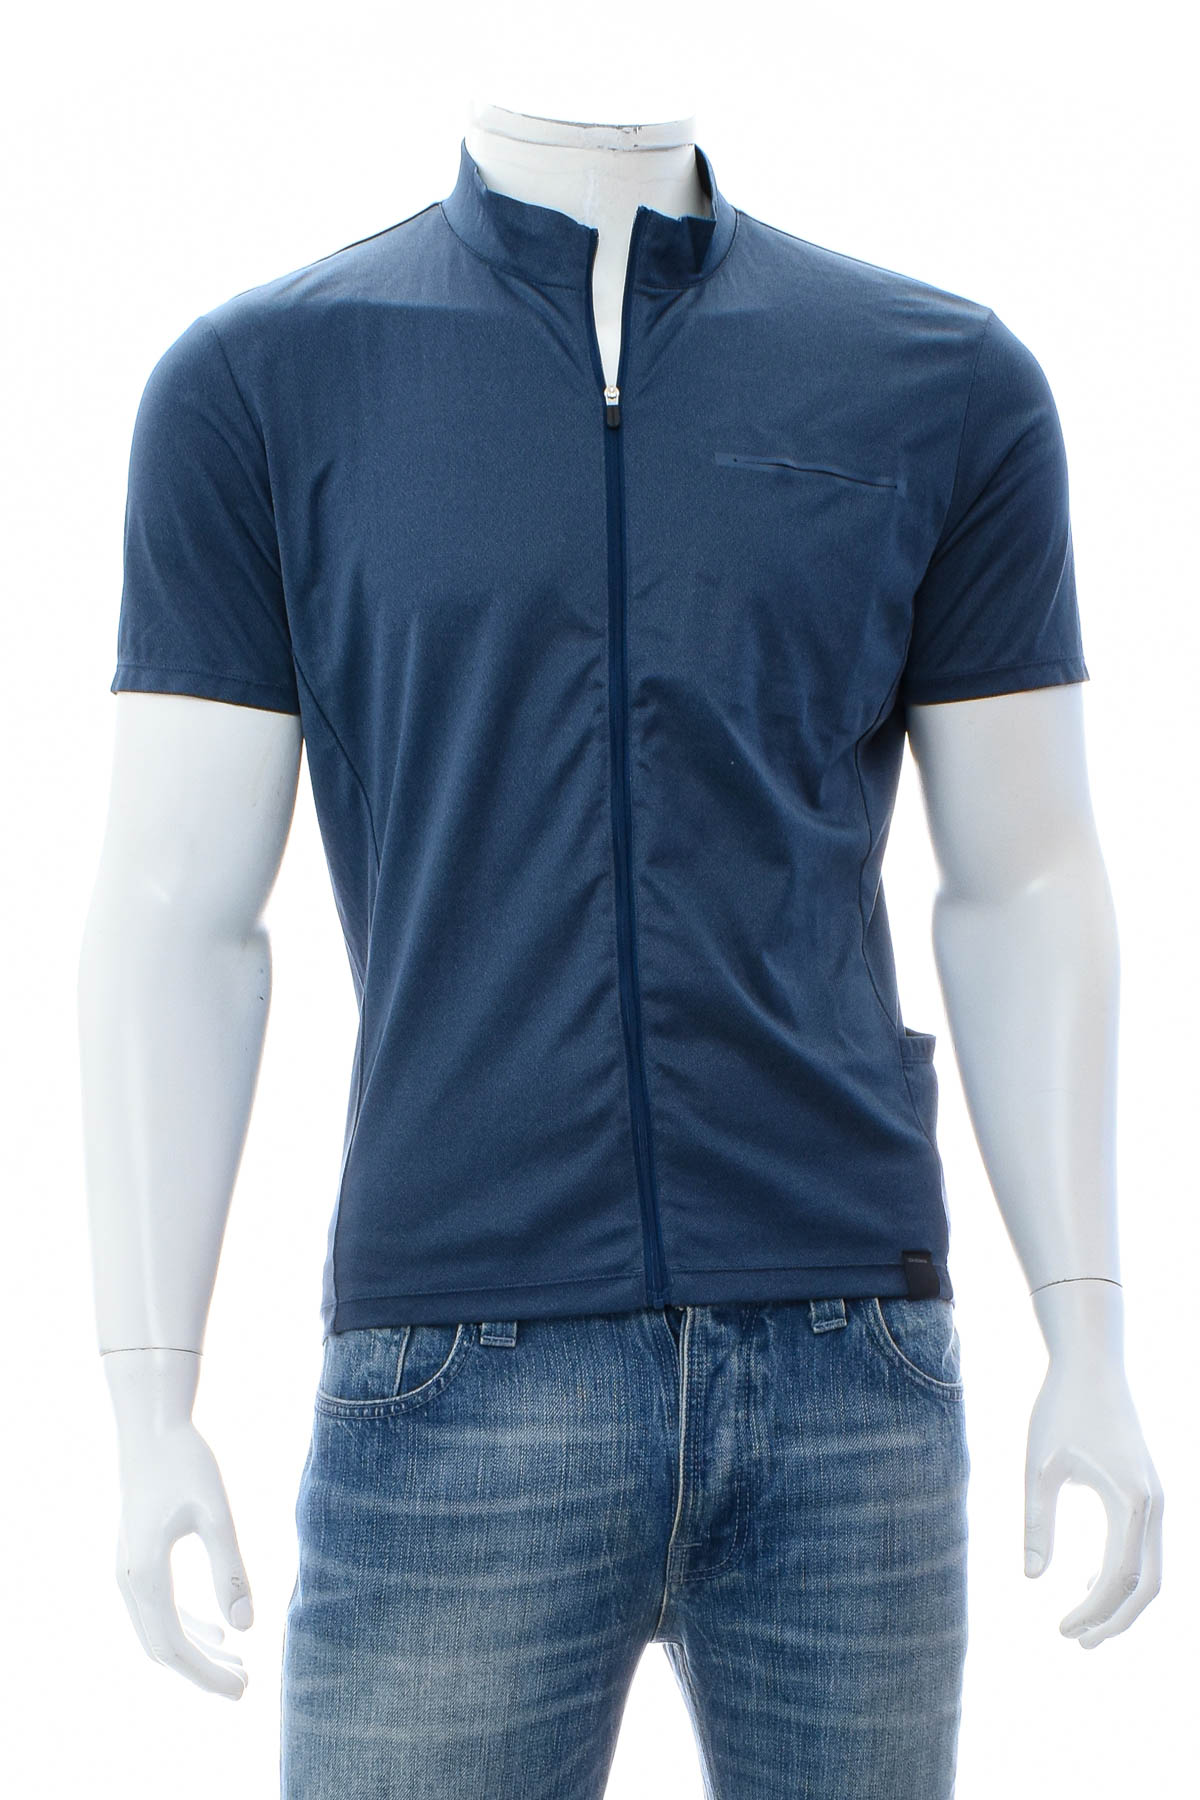 Male sports top for cycling - SHIMANO - 0